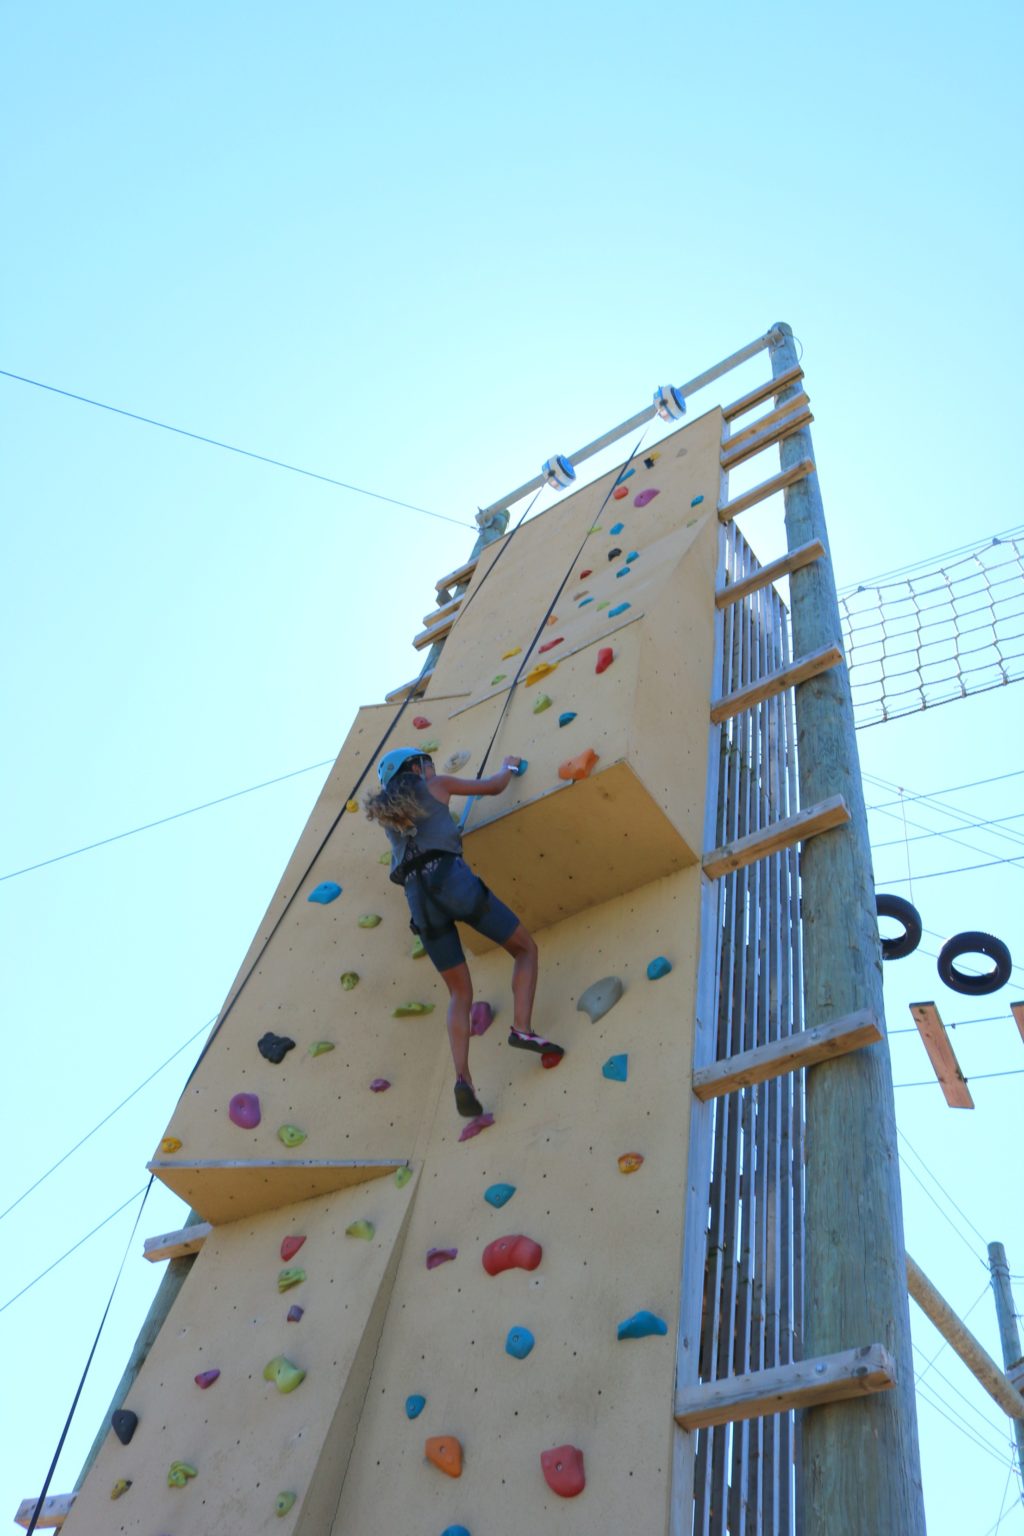 Gabby climbs the rock wall in record time.